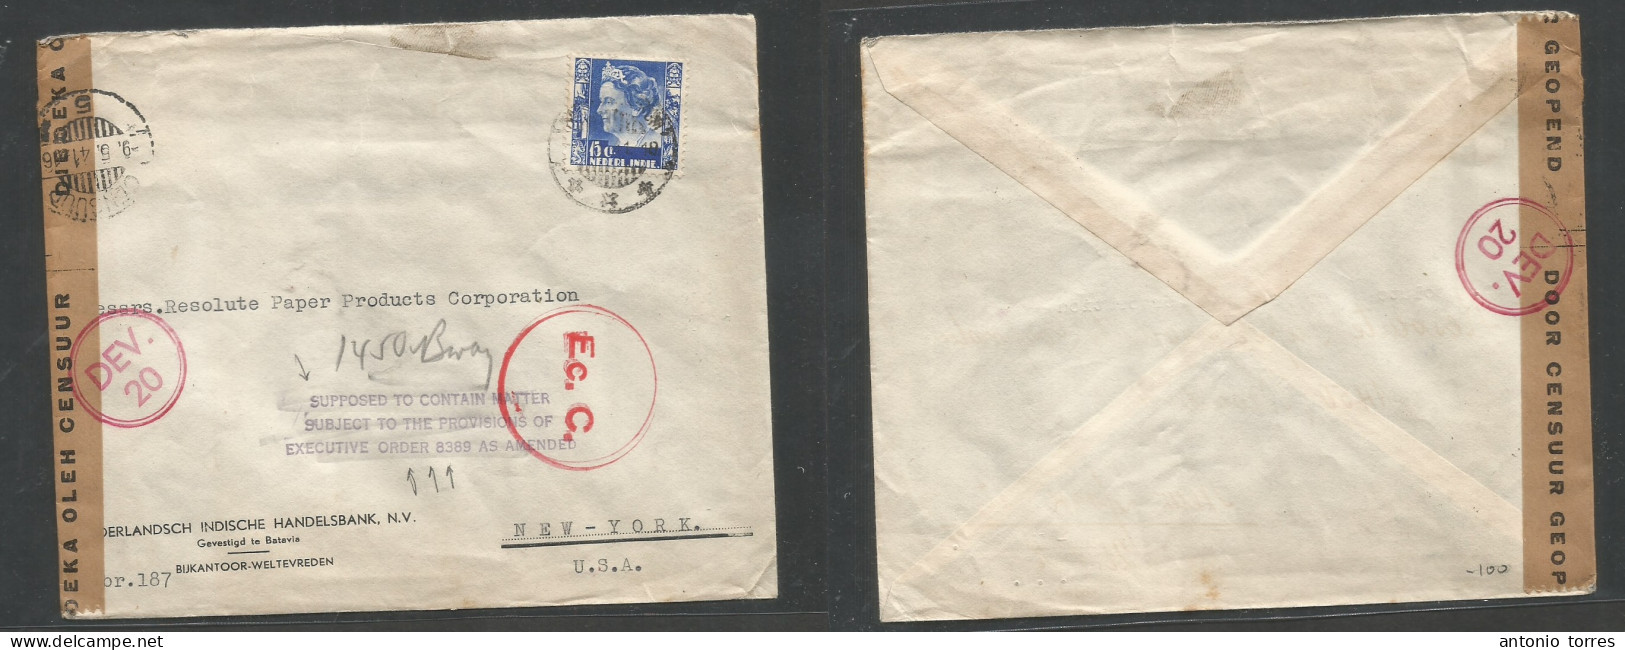 Dutch Indies. 1941 (9 May) Batavia - USA, NYC. Single 15c Fkd Comercial Envelope, Sea Mail Route, Depart Censor + Specia - Netherlands Indies